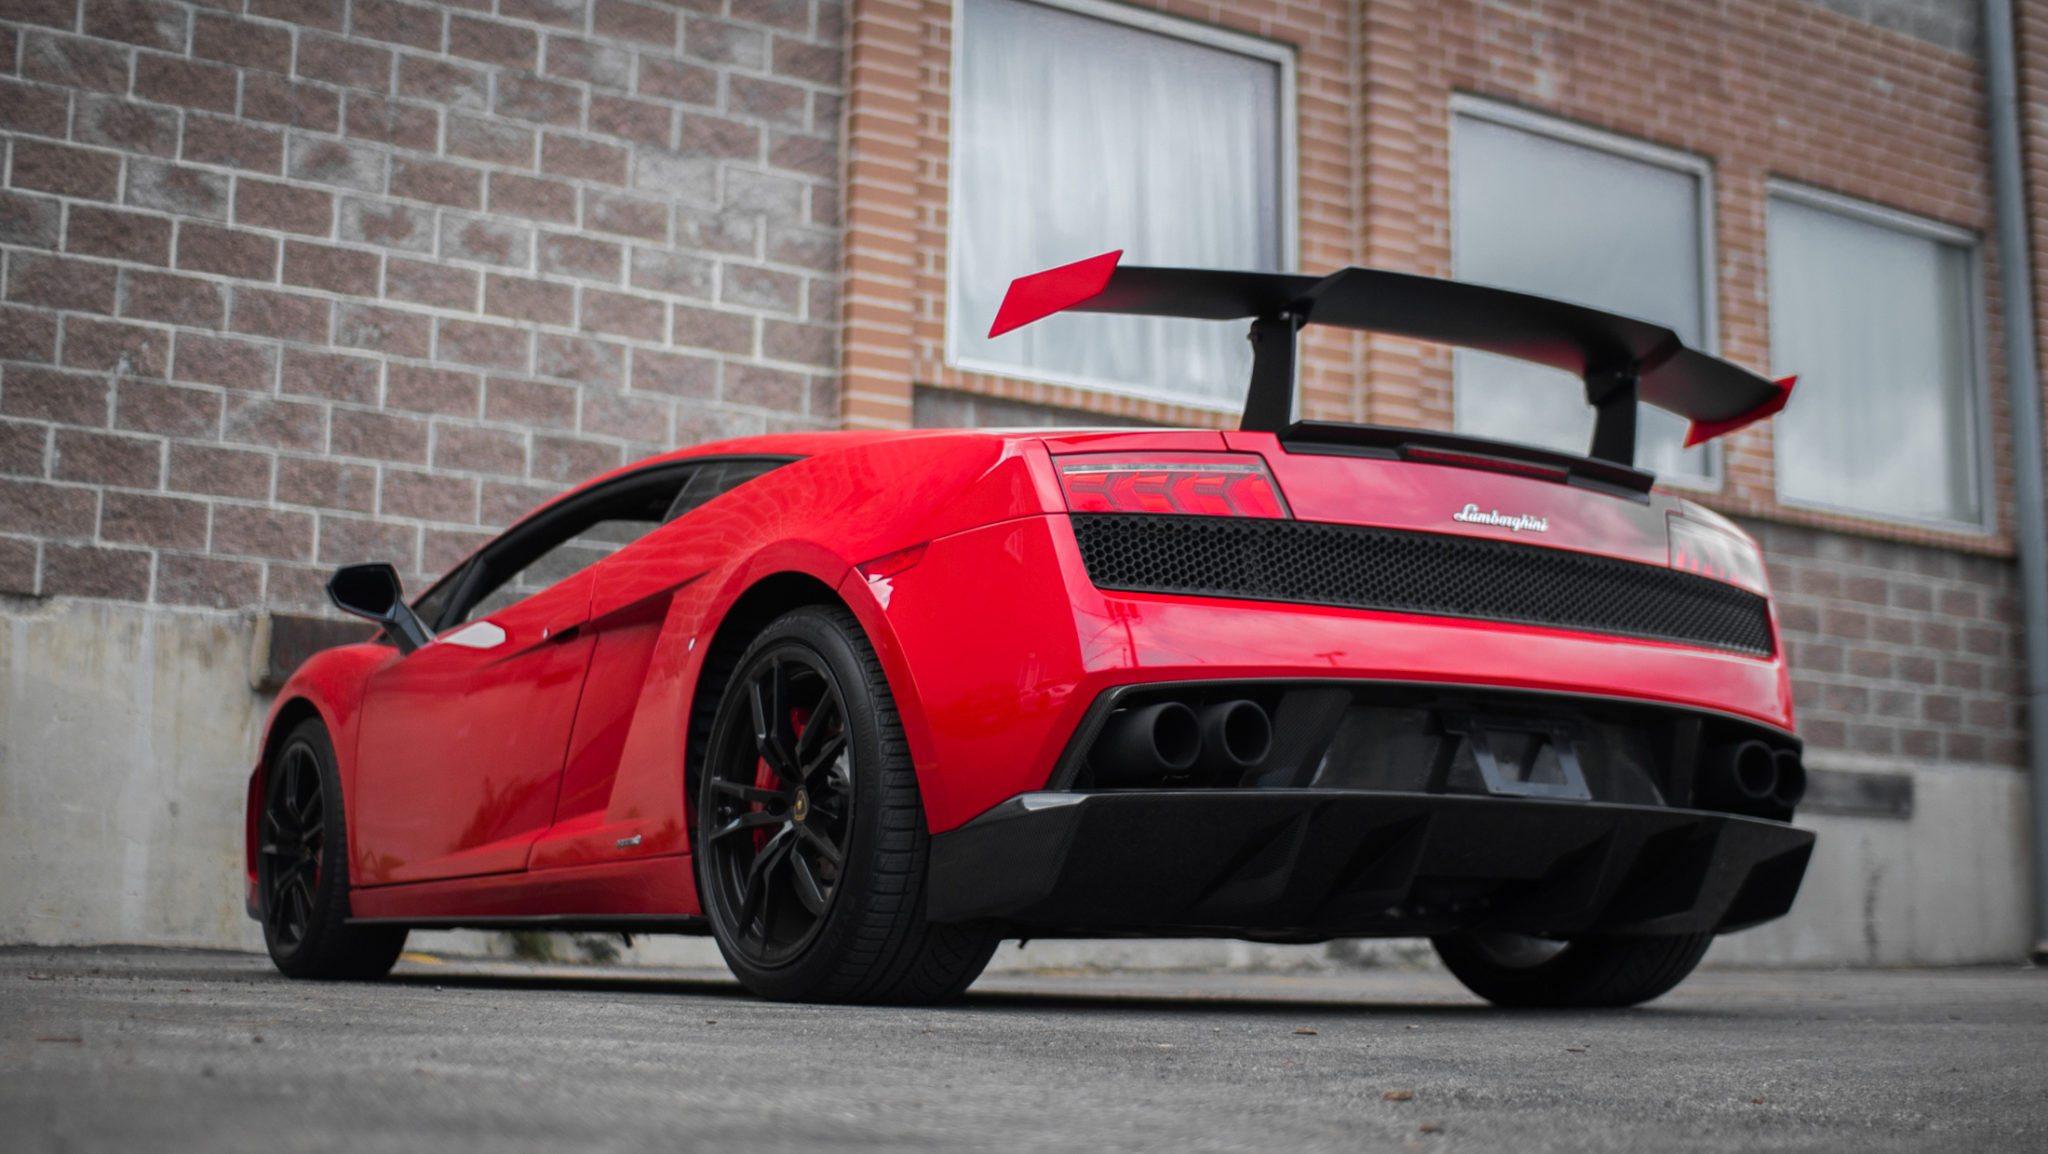 Image xtreme xperience super trofeo stradale exterior rear